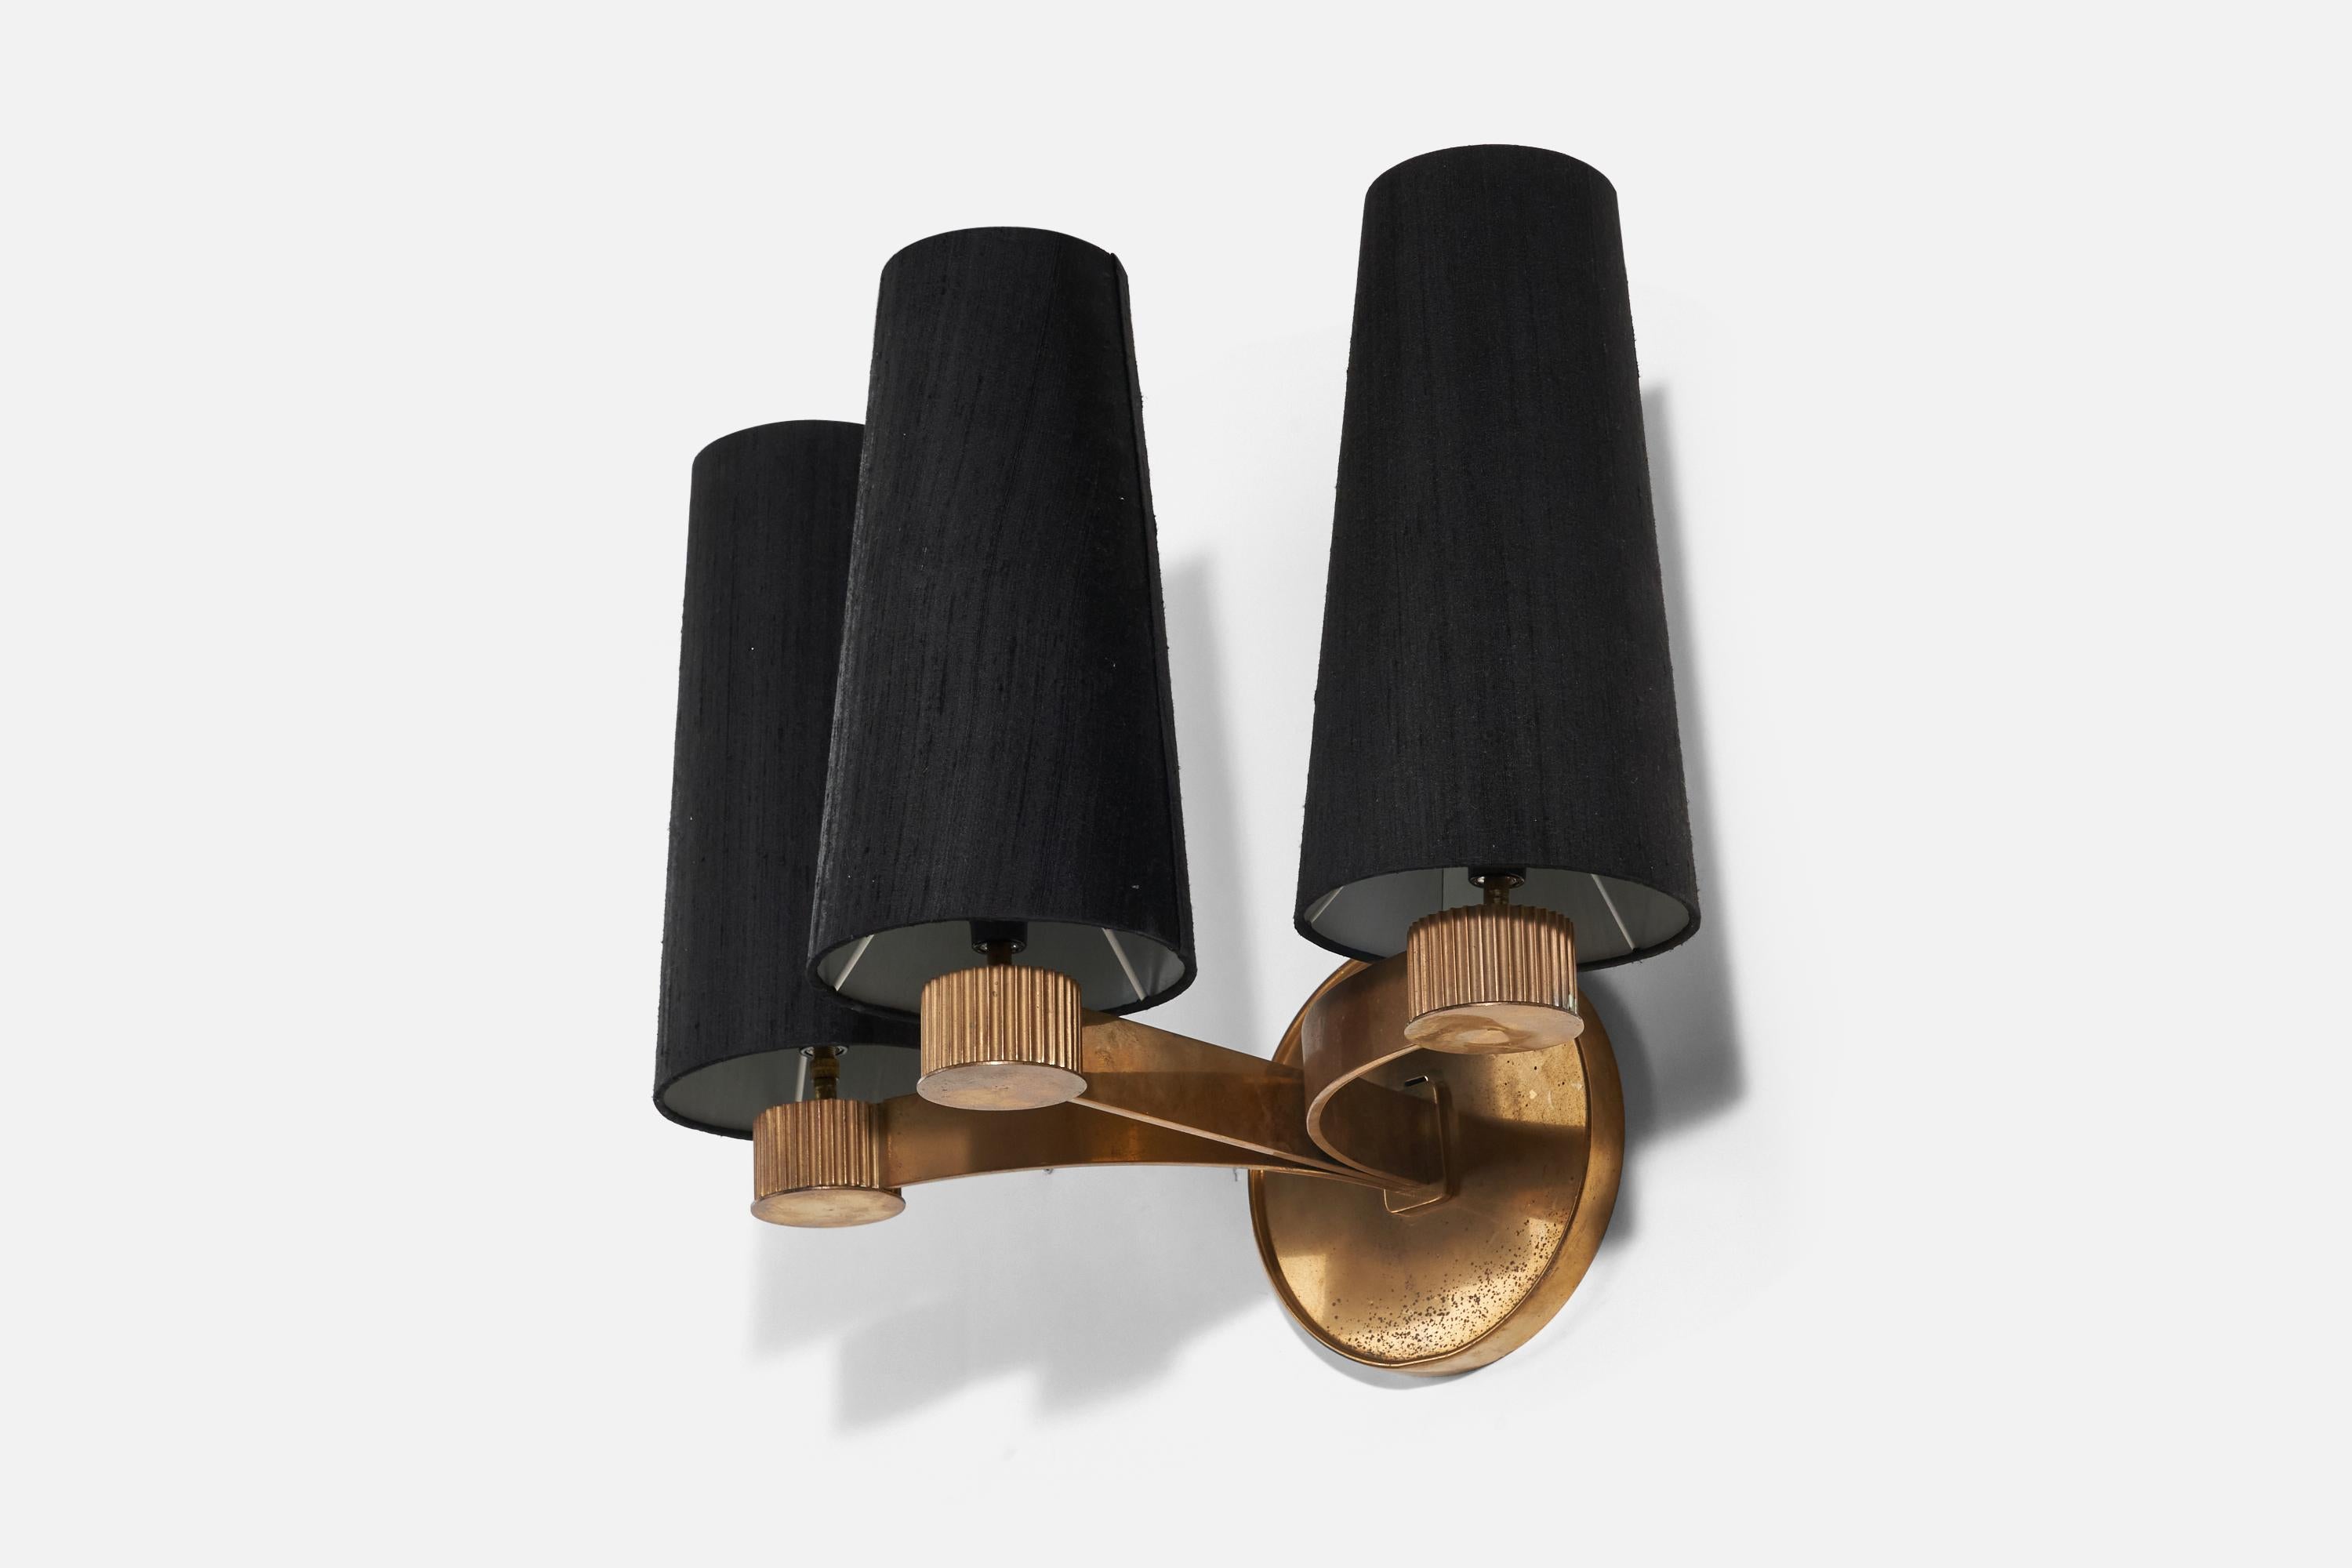 A brass black fabric 3-light sconce / wall light designed and produced in Denmark, 1940s.

Sold with Lampshades. Dimensions stated are of Sconce with Lampshades.

Socket takes Euro base E-12 bulb.

There is no maximum wattage stated on the